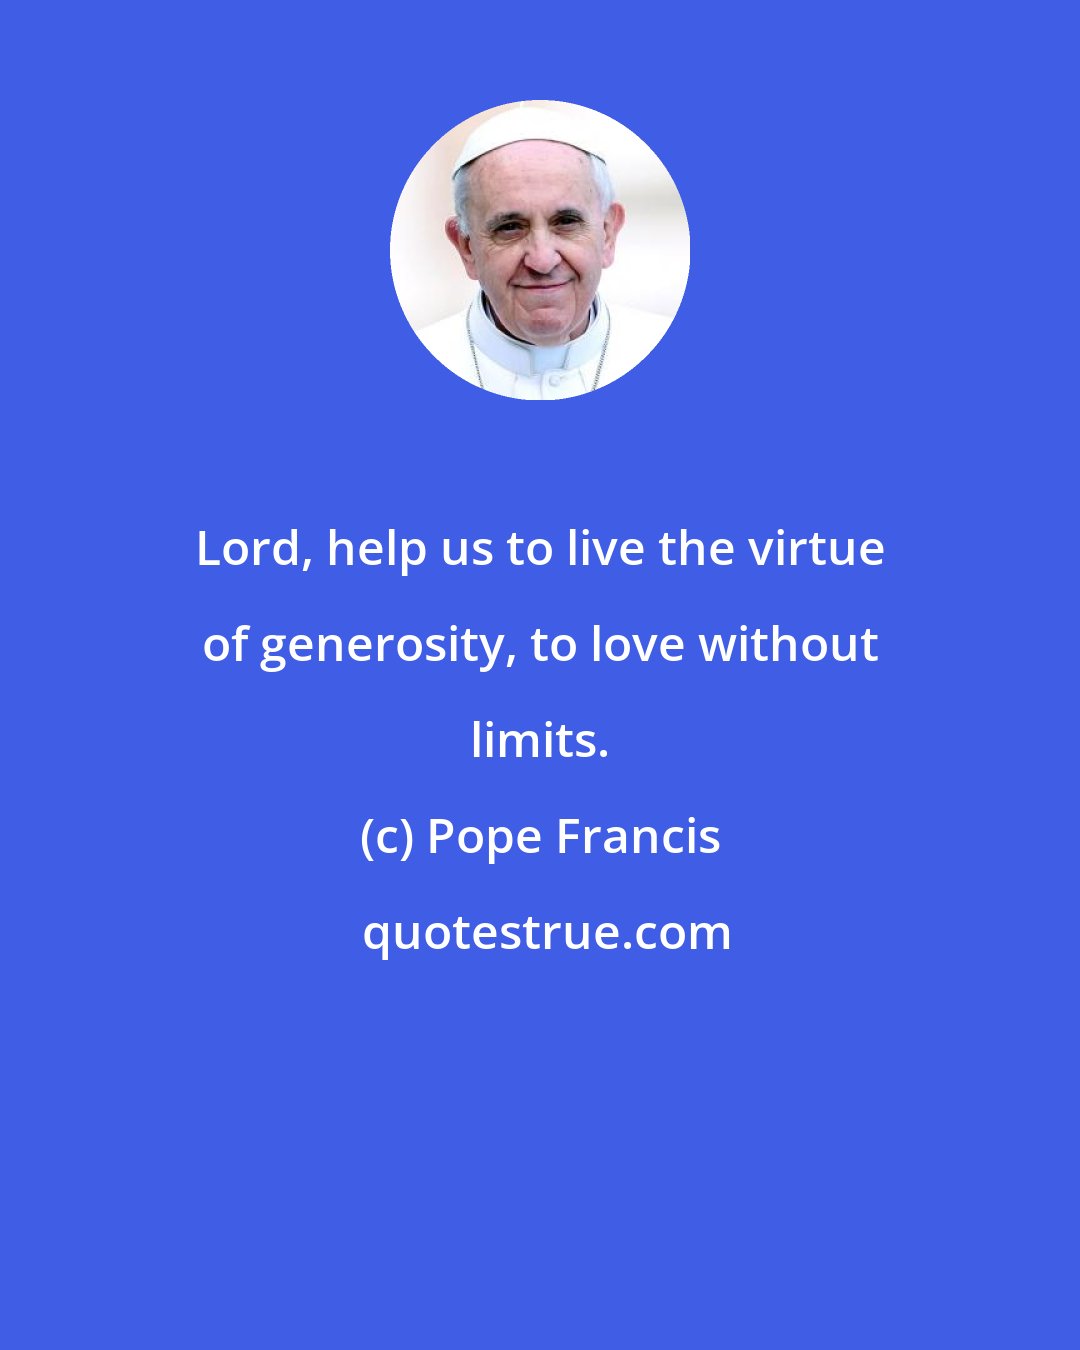 Pope Francis: Lord, help us to live the virtue of generosity, to love without limits.